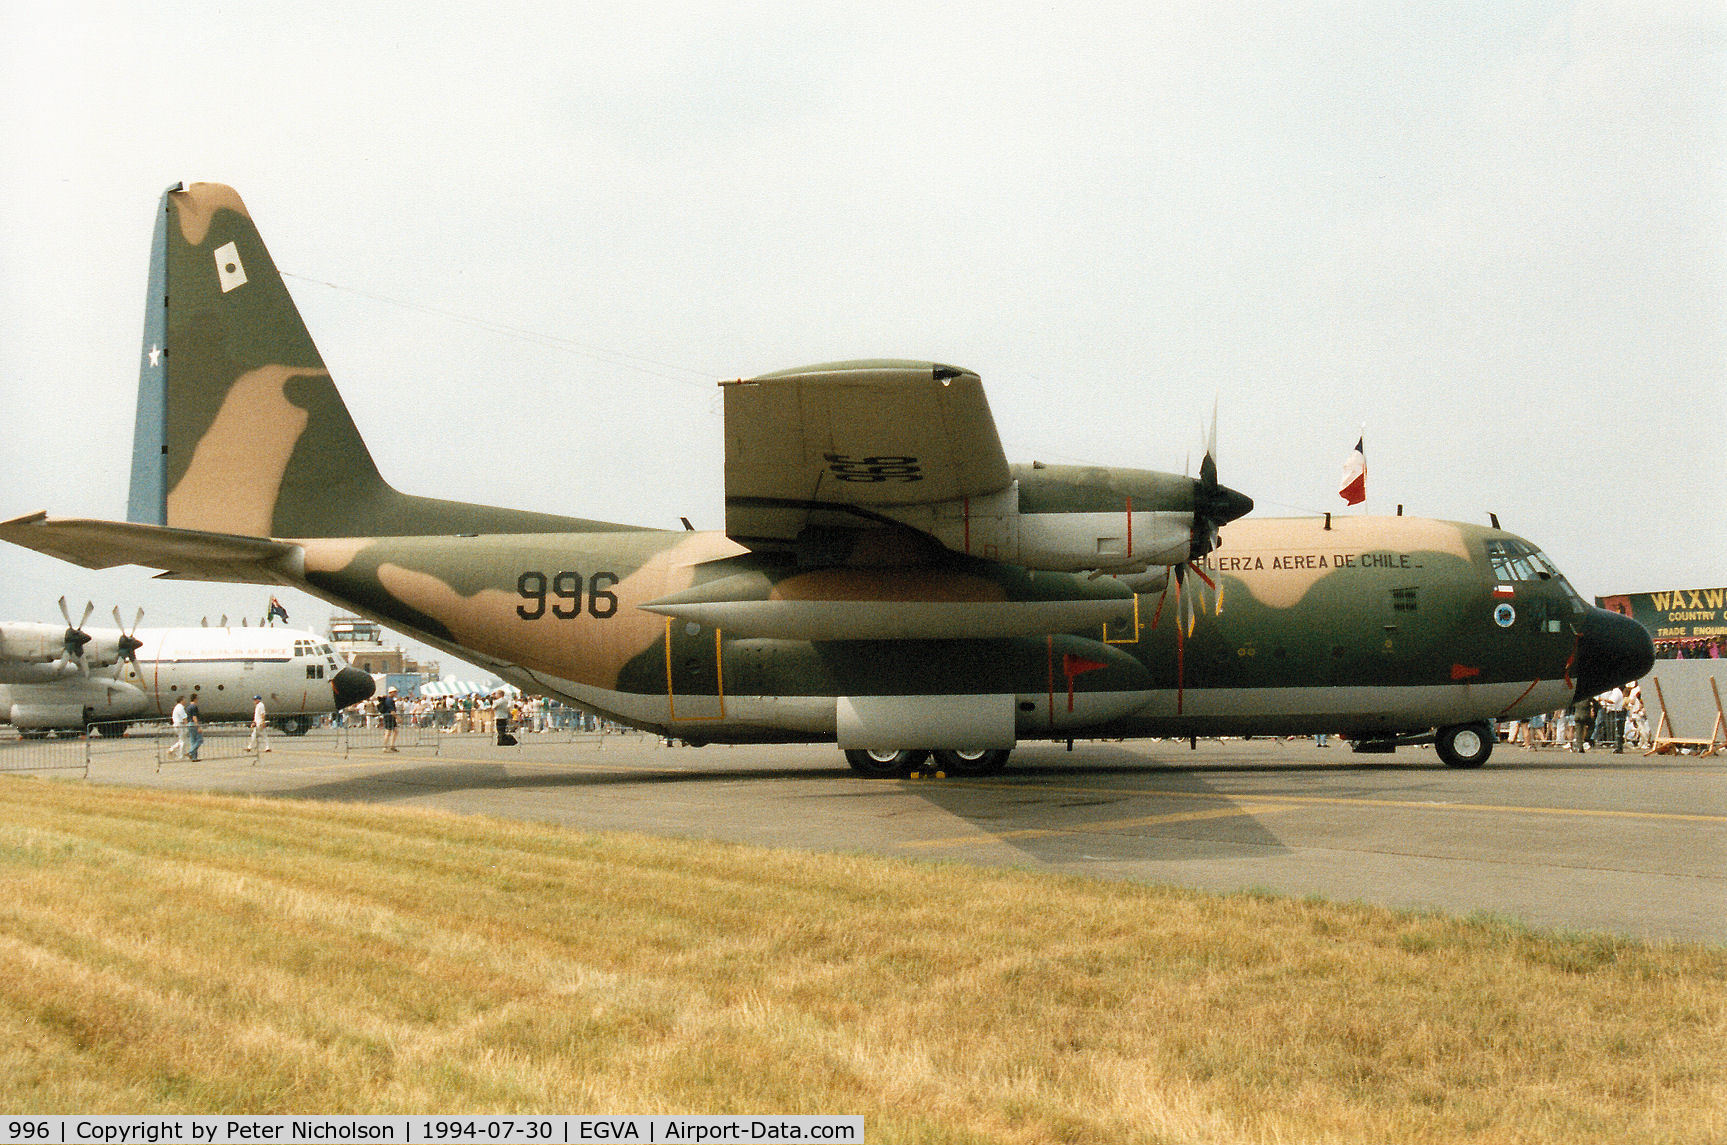 996, 1972 Lockheed C-130H Hercules C/N 382-4496, C-130H Hercules of Grupo 10 of the Chilean Air Force on display at the 1994 Intnl Air Tattoo at RAF Fairford.